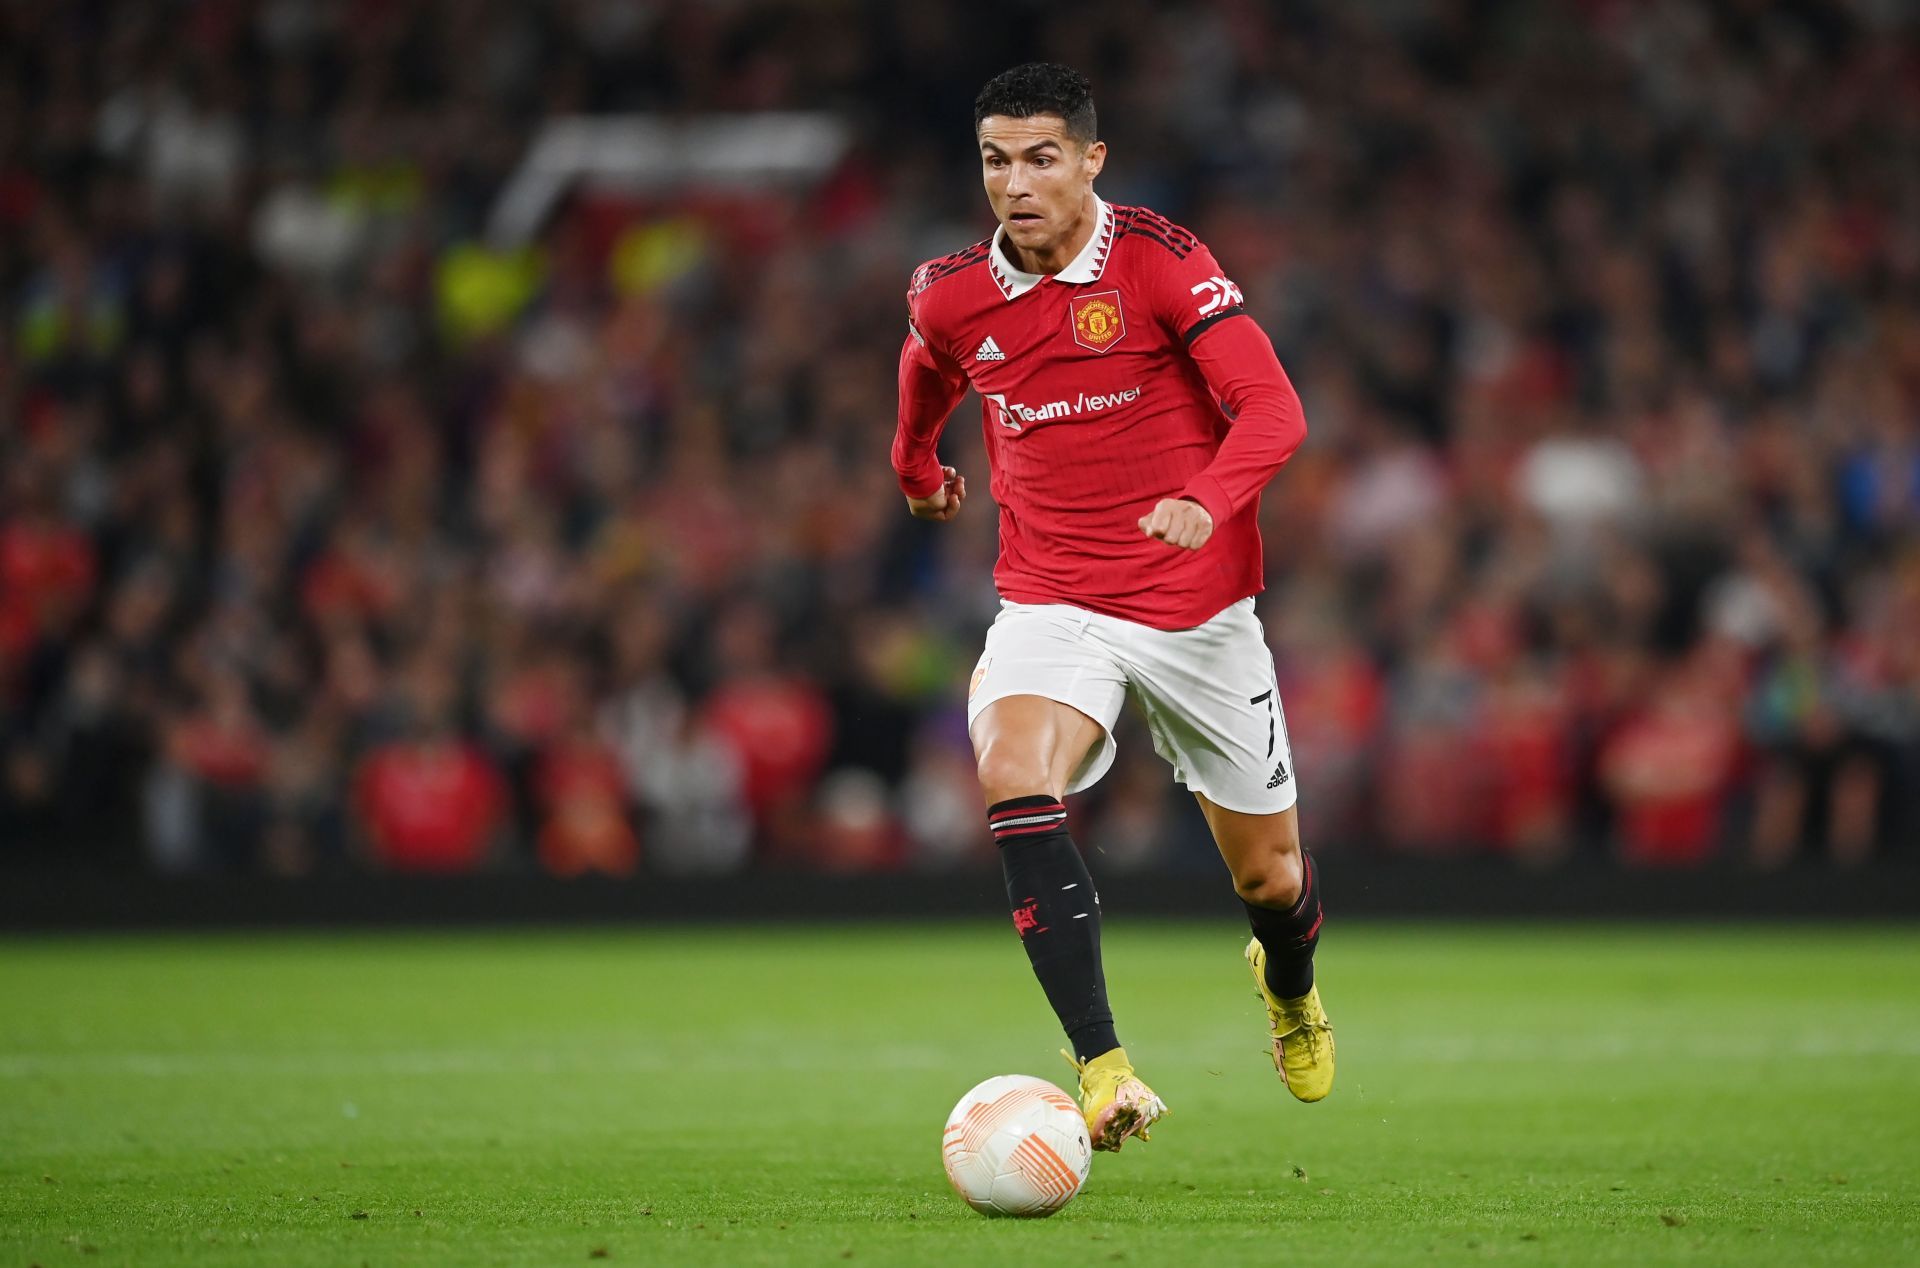 Cristiano Ronaldo has dropped down the pecking order at Manchester United of late.